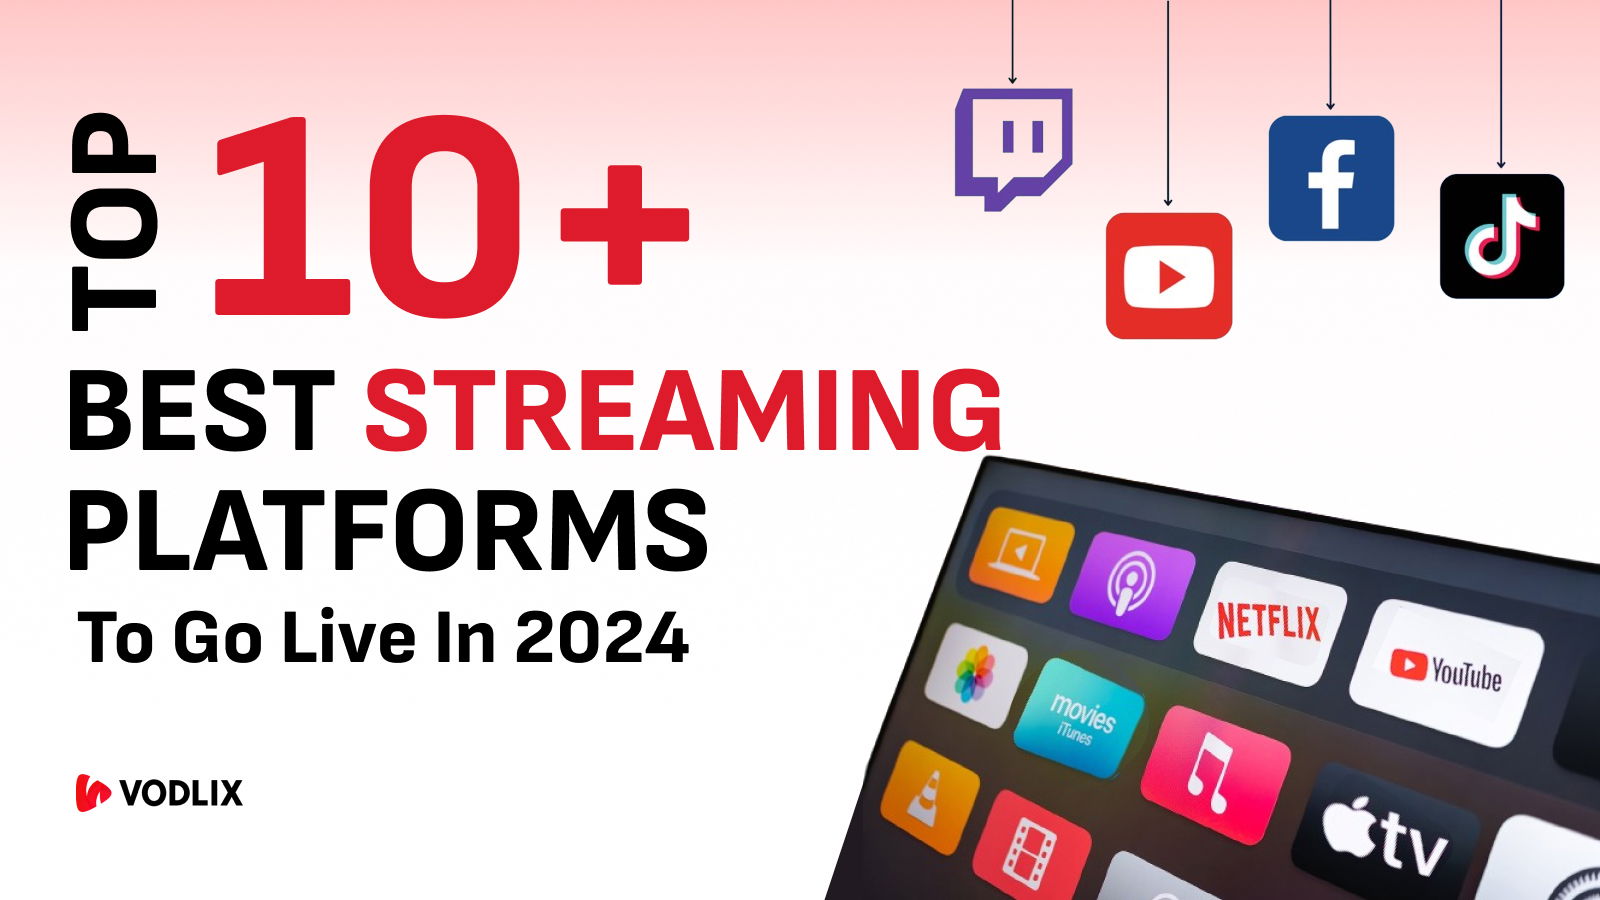 Top 10 Best Streaming Platforms To Go Live in 2024